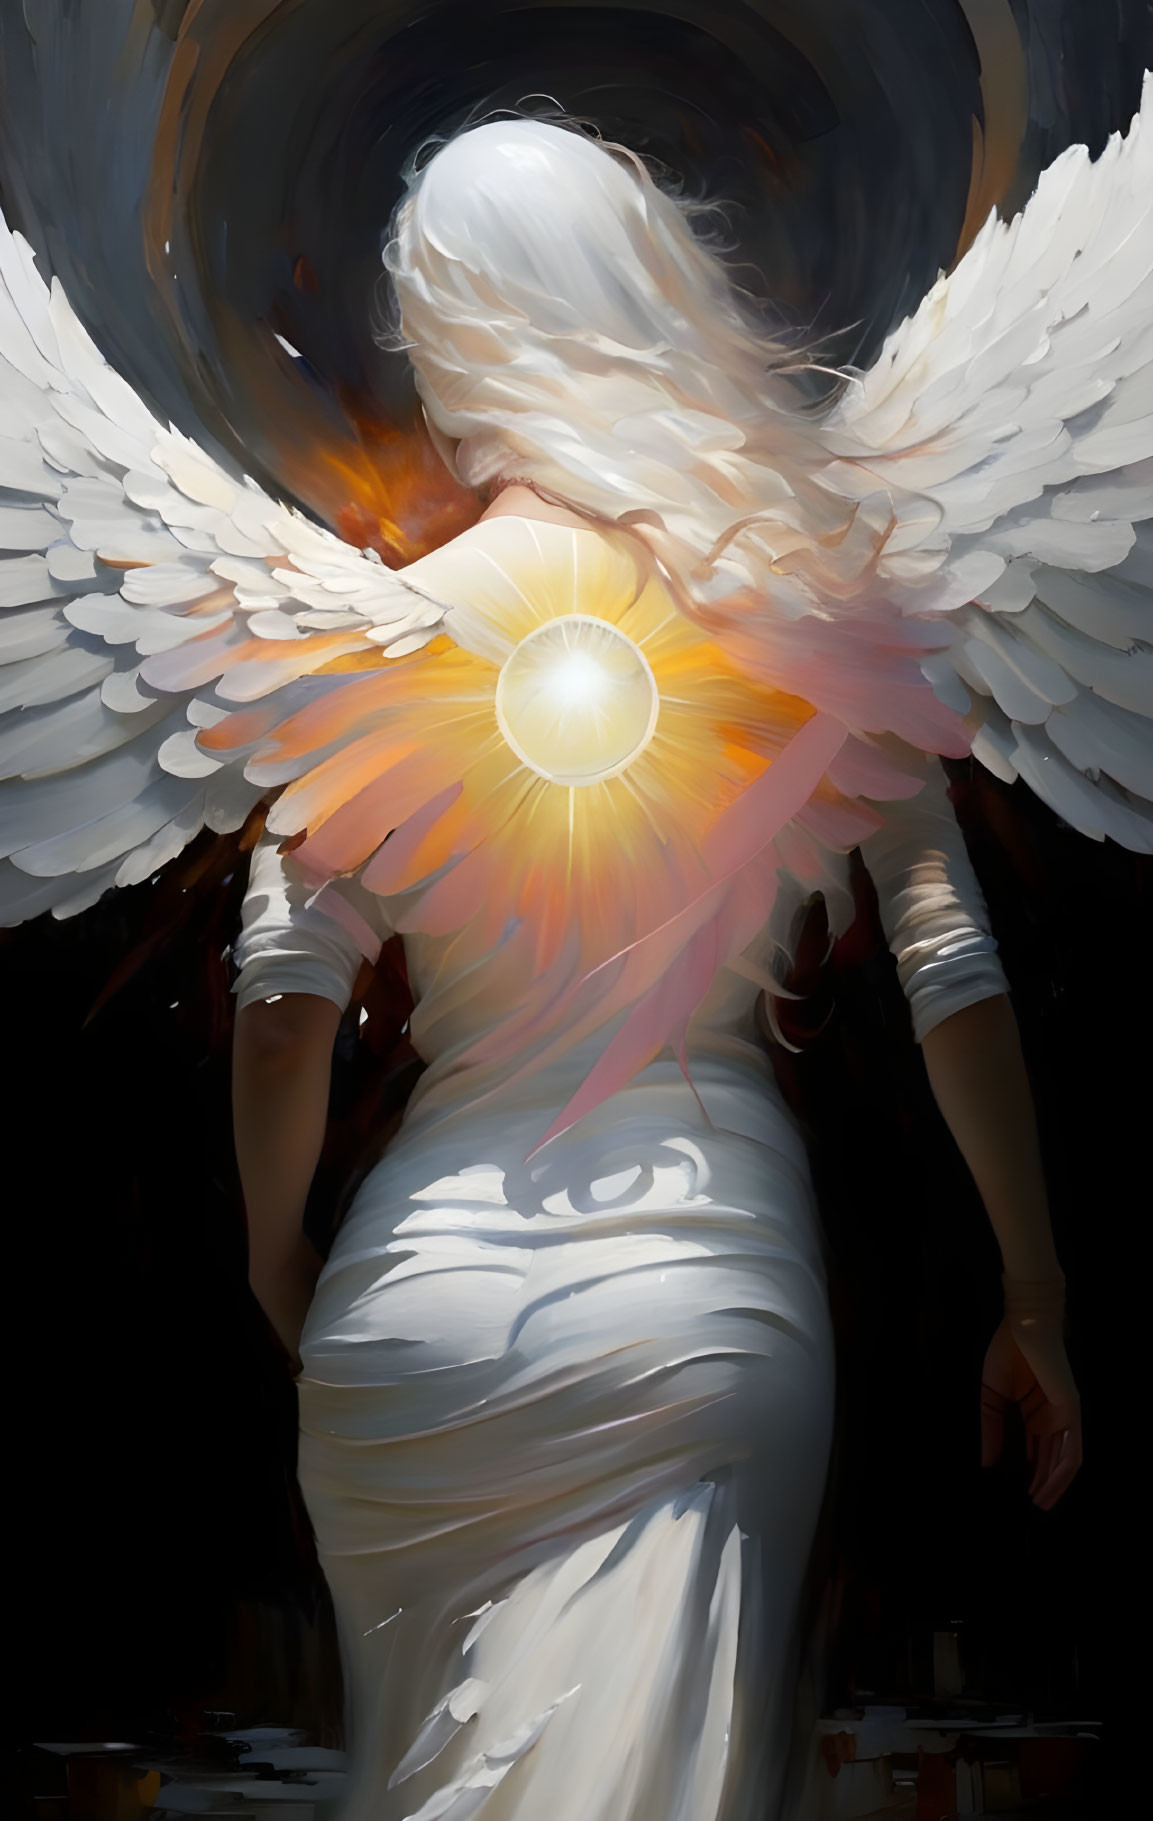 Figure in white dress with wings and halo, back turned.